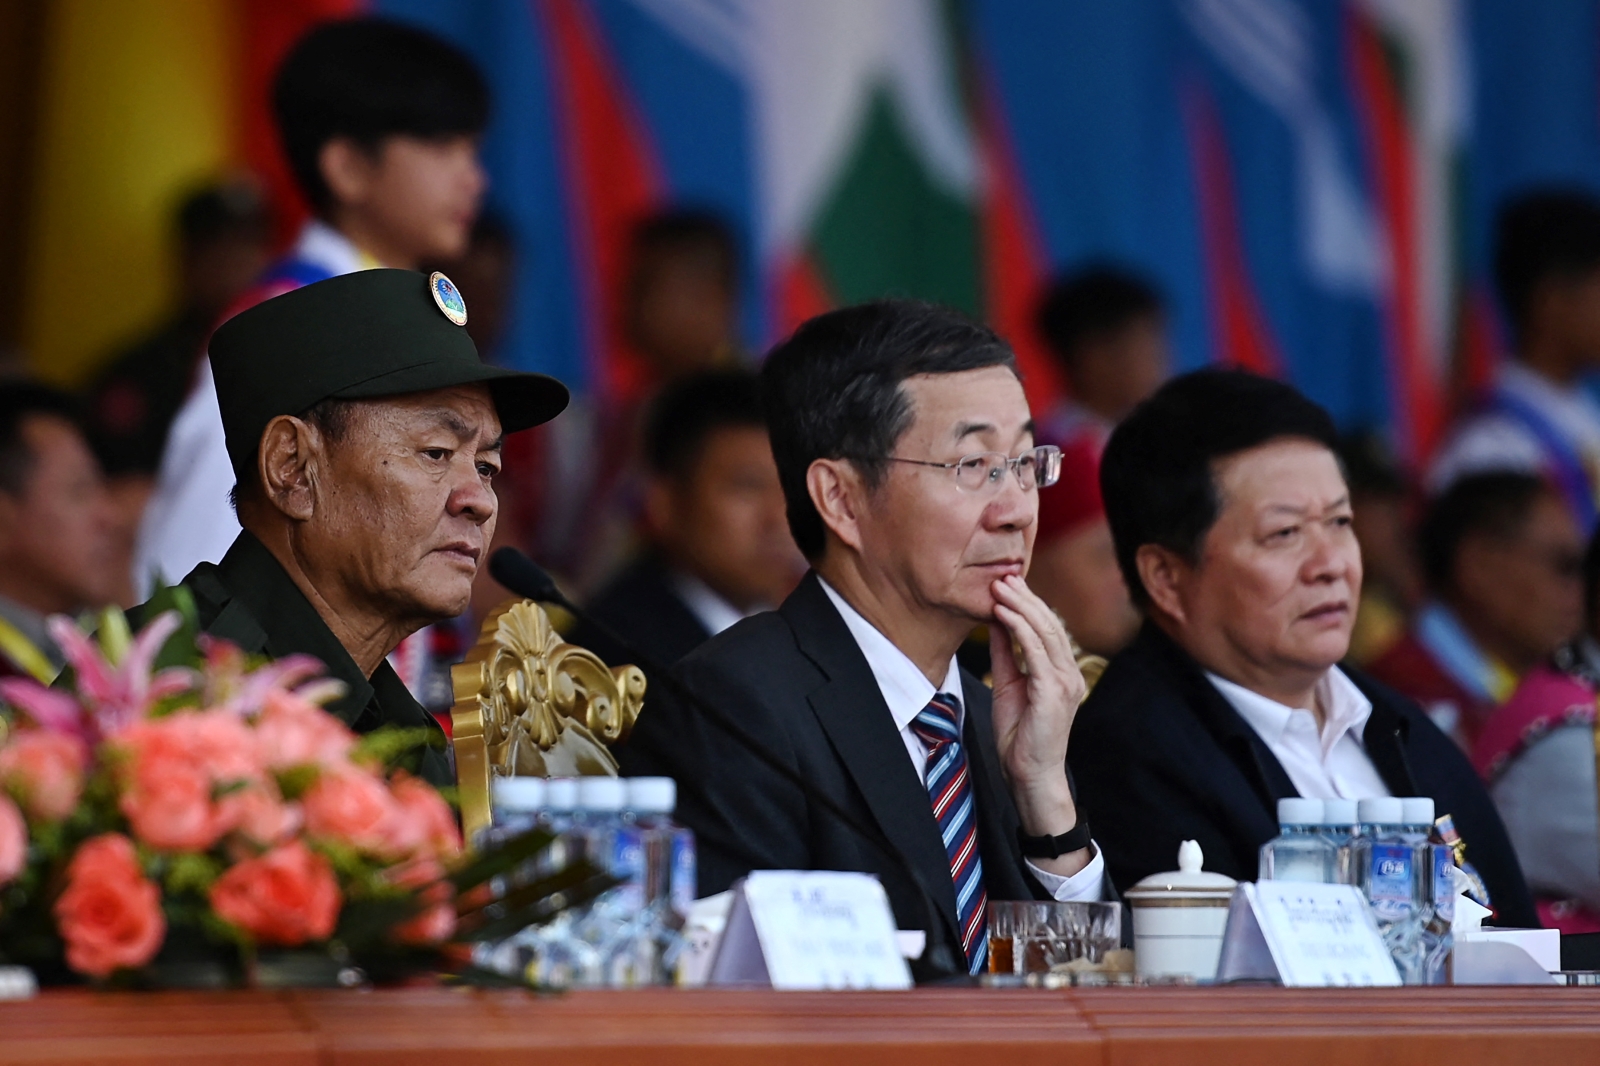 UWSA leader Bao Youxiang and China's special envoy for Asian affairs Sun Guoxiang watch a military parade to commemorate 30 years of a ceasefire between the armed group and the Myanmar military in the UWSA headquartes of Panghsang on April 17, 2019. (AFP)